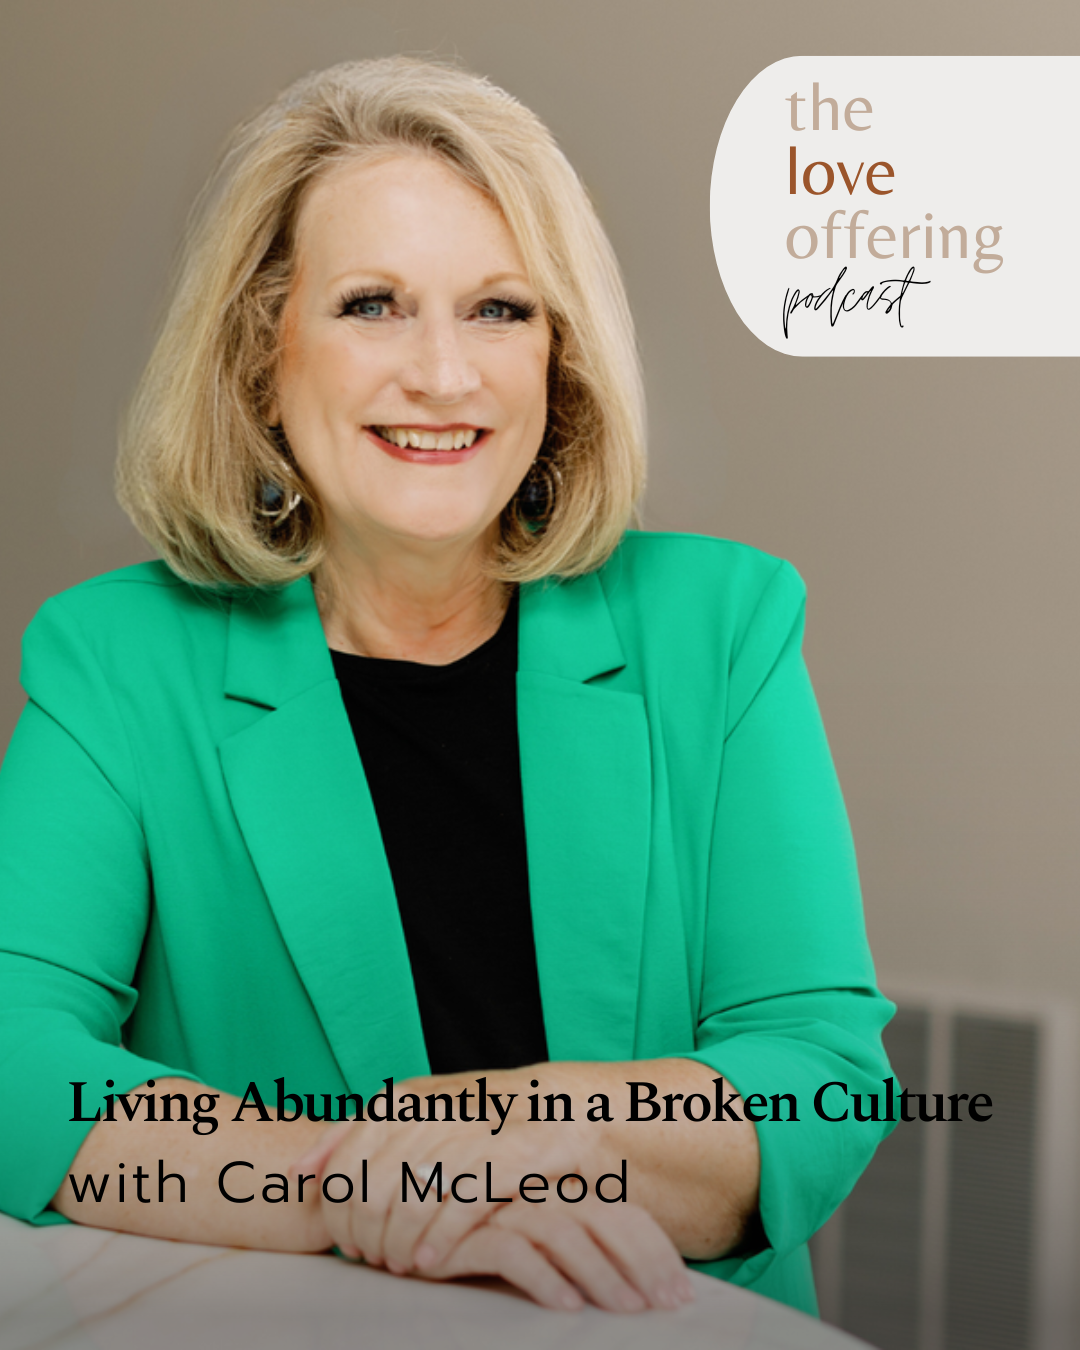 Overflowing: Living Abundantly in a Broken Culture with Carol McLeod